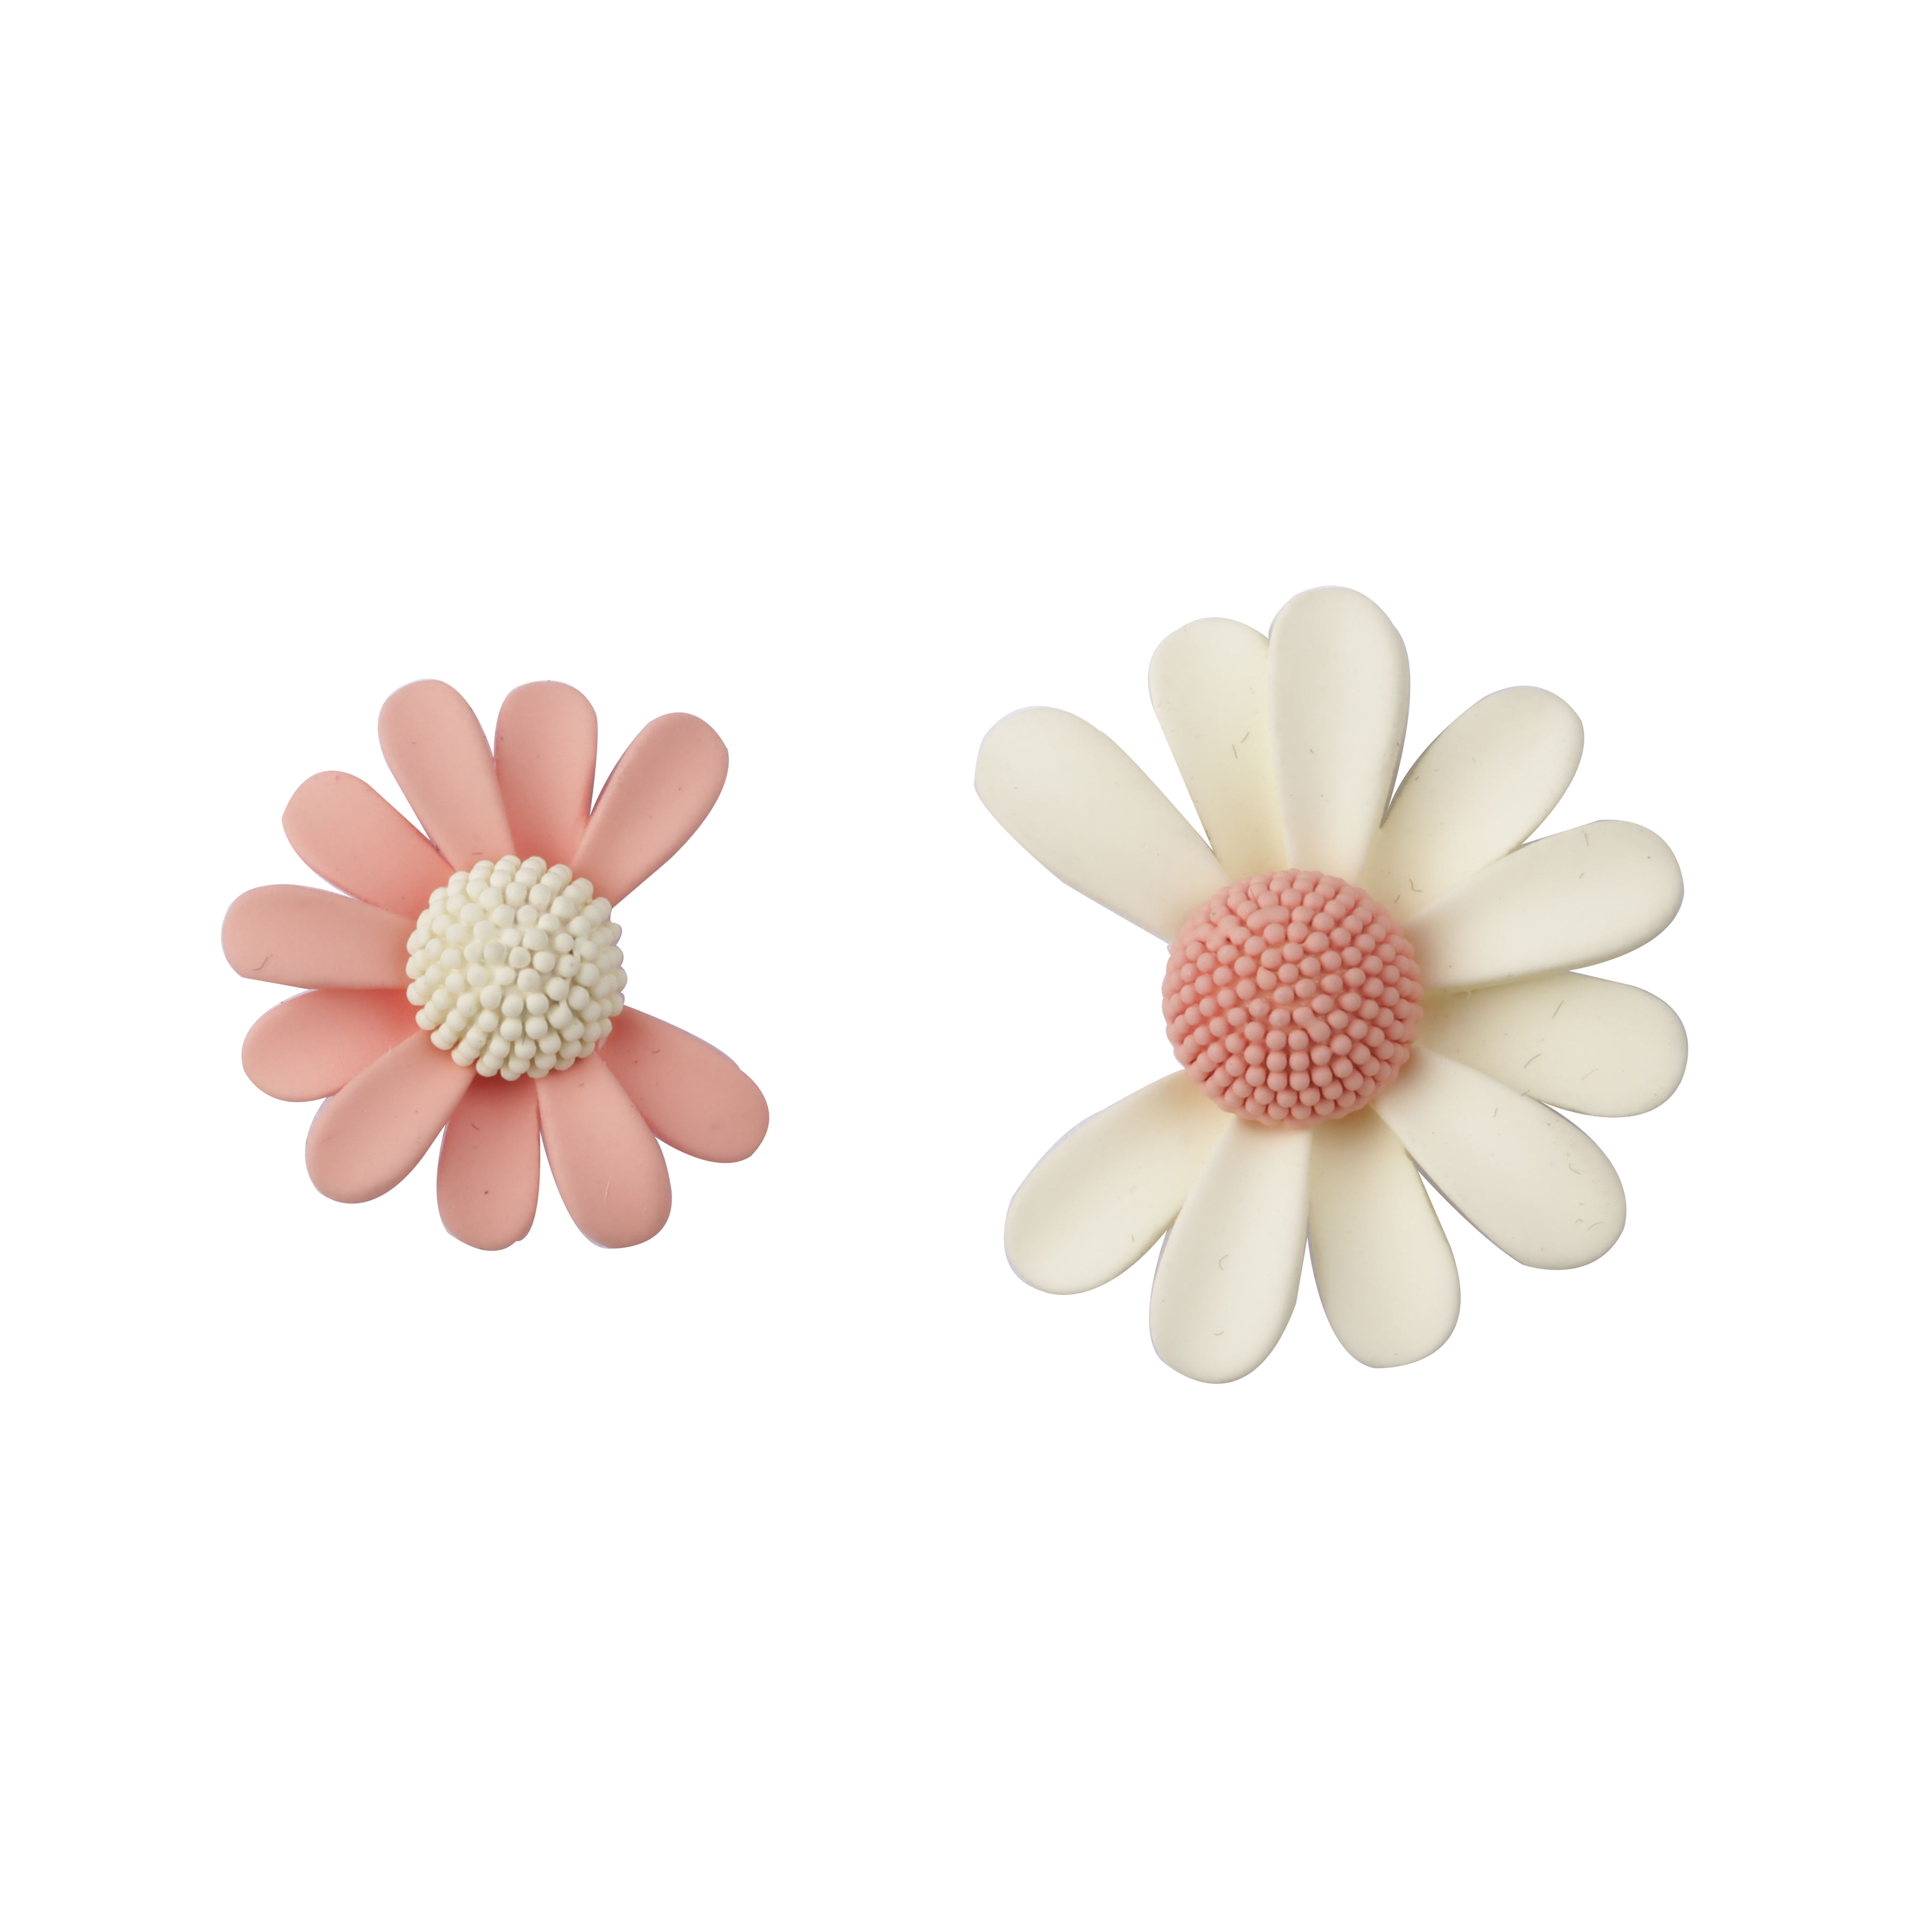 Creamy Pink And White Daisy Earrings High Quality Enamel Spraying Effect